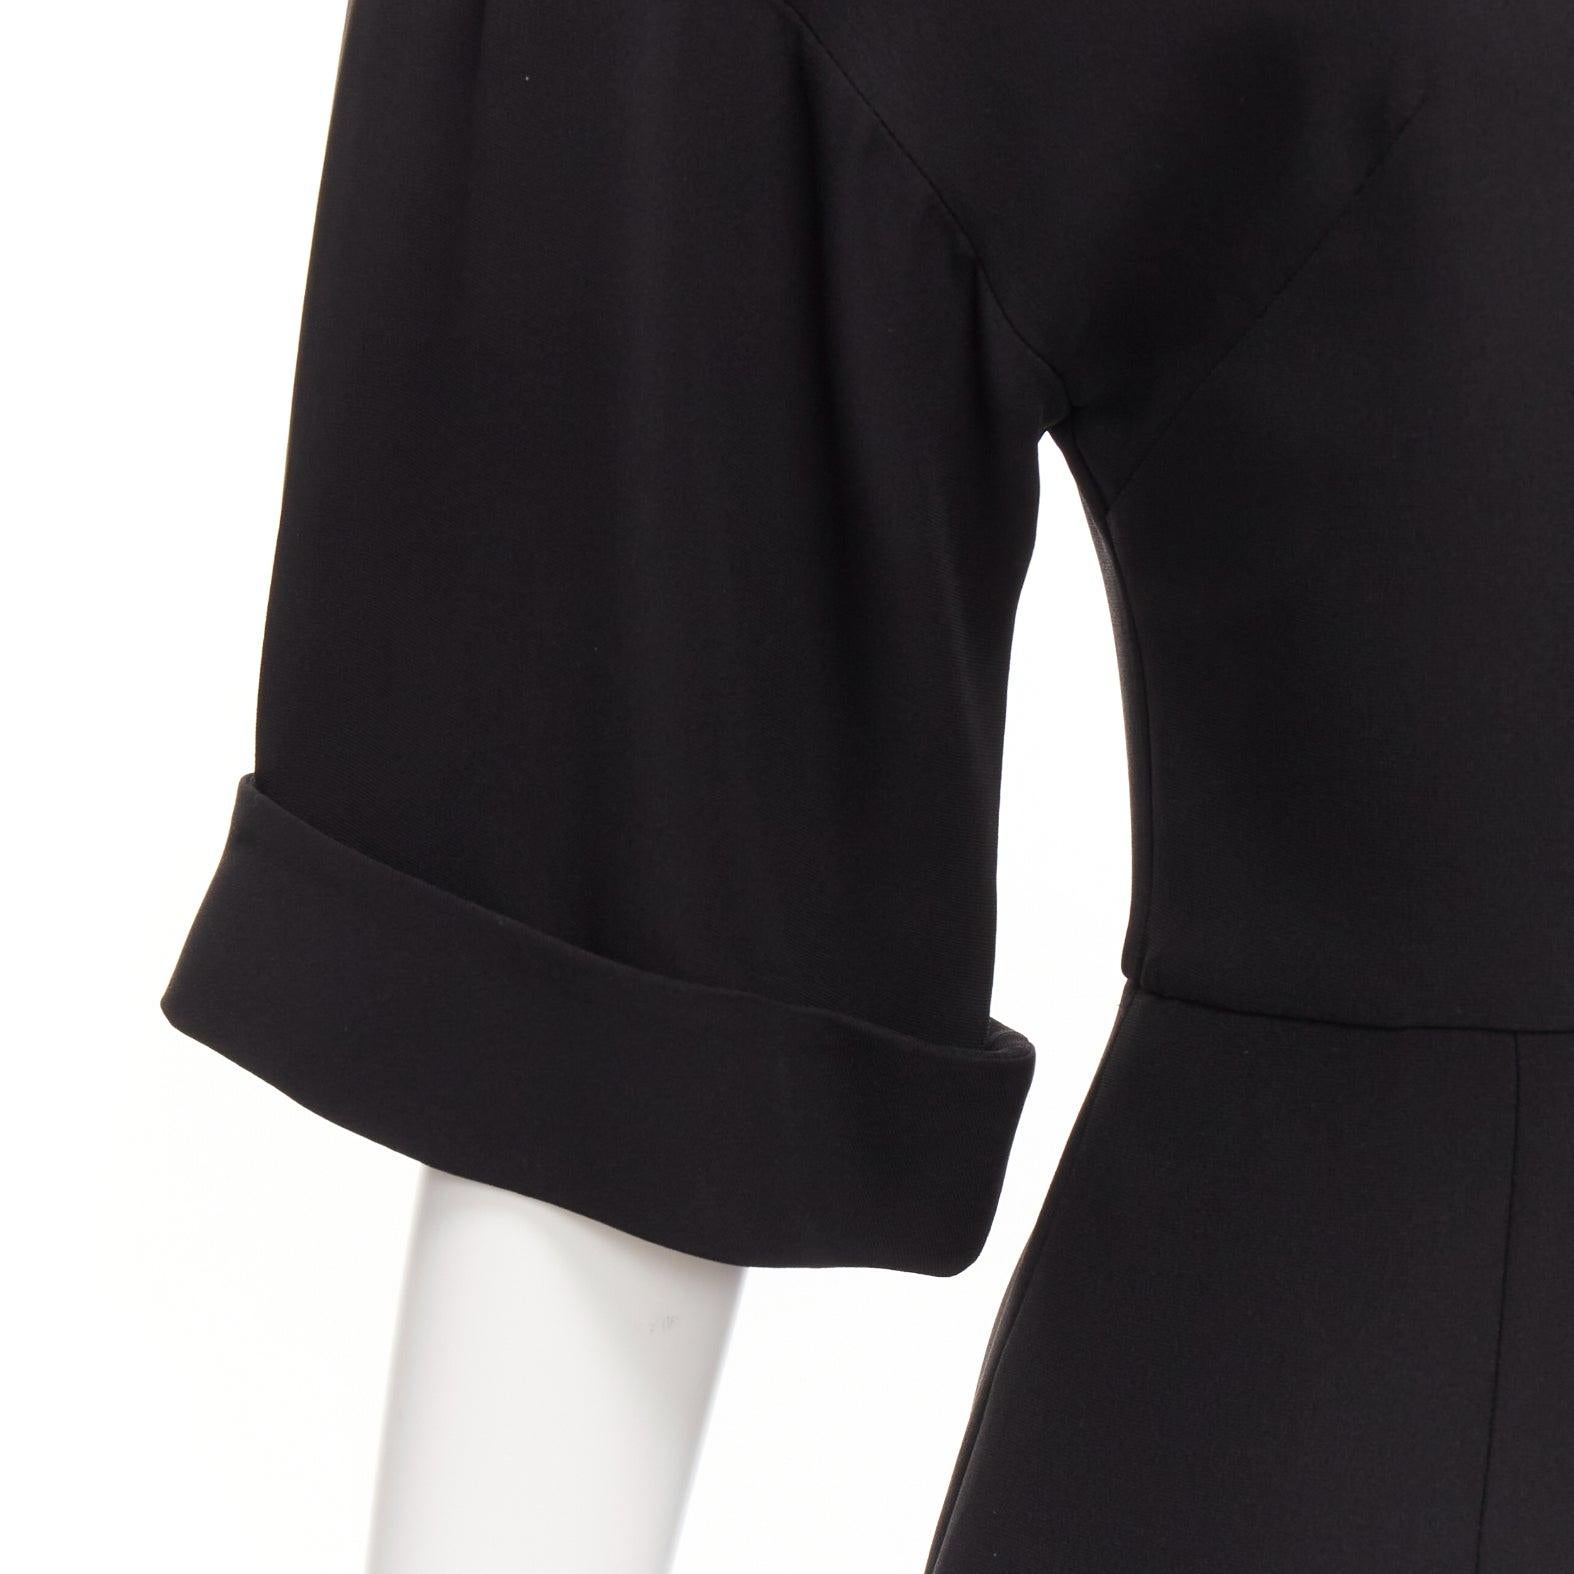 VALENTINO 100% silk black bell half sleeve wide leg crew neck playsuit IT38 XS
Reference: LNKO/A02339
Brand: Valentino
Designer: Pier Paolo Piccioli
Material: Silk
Color: Black
Pattern: Solid
Closure: Zip
Lining: Black Fabric
Extra Details: Back